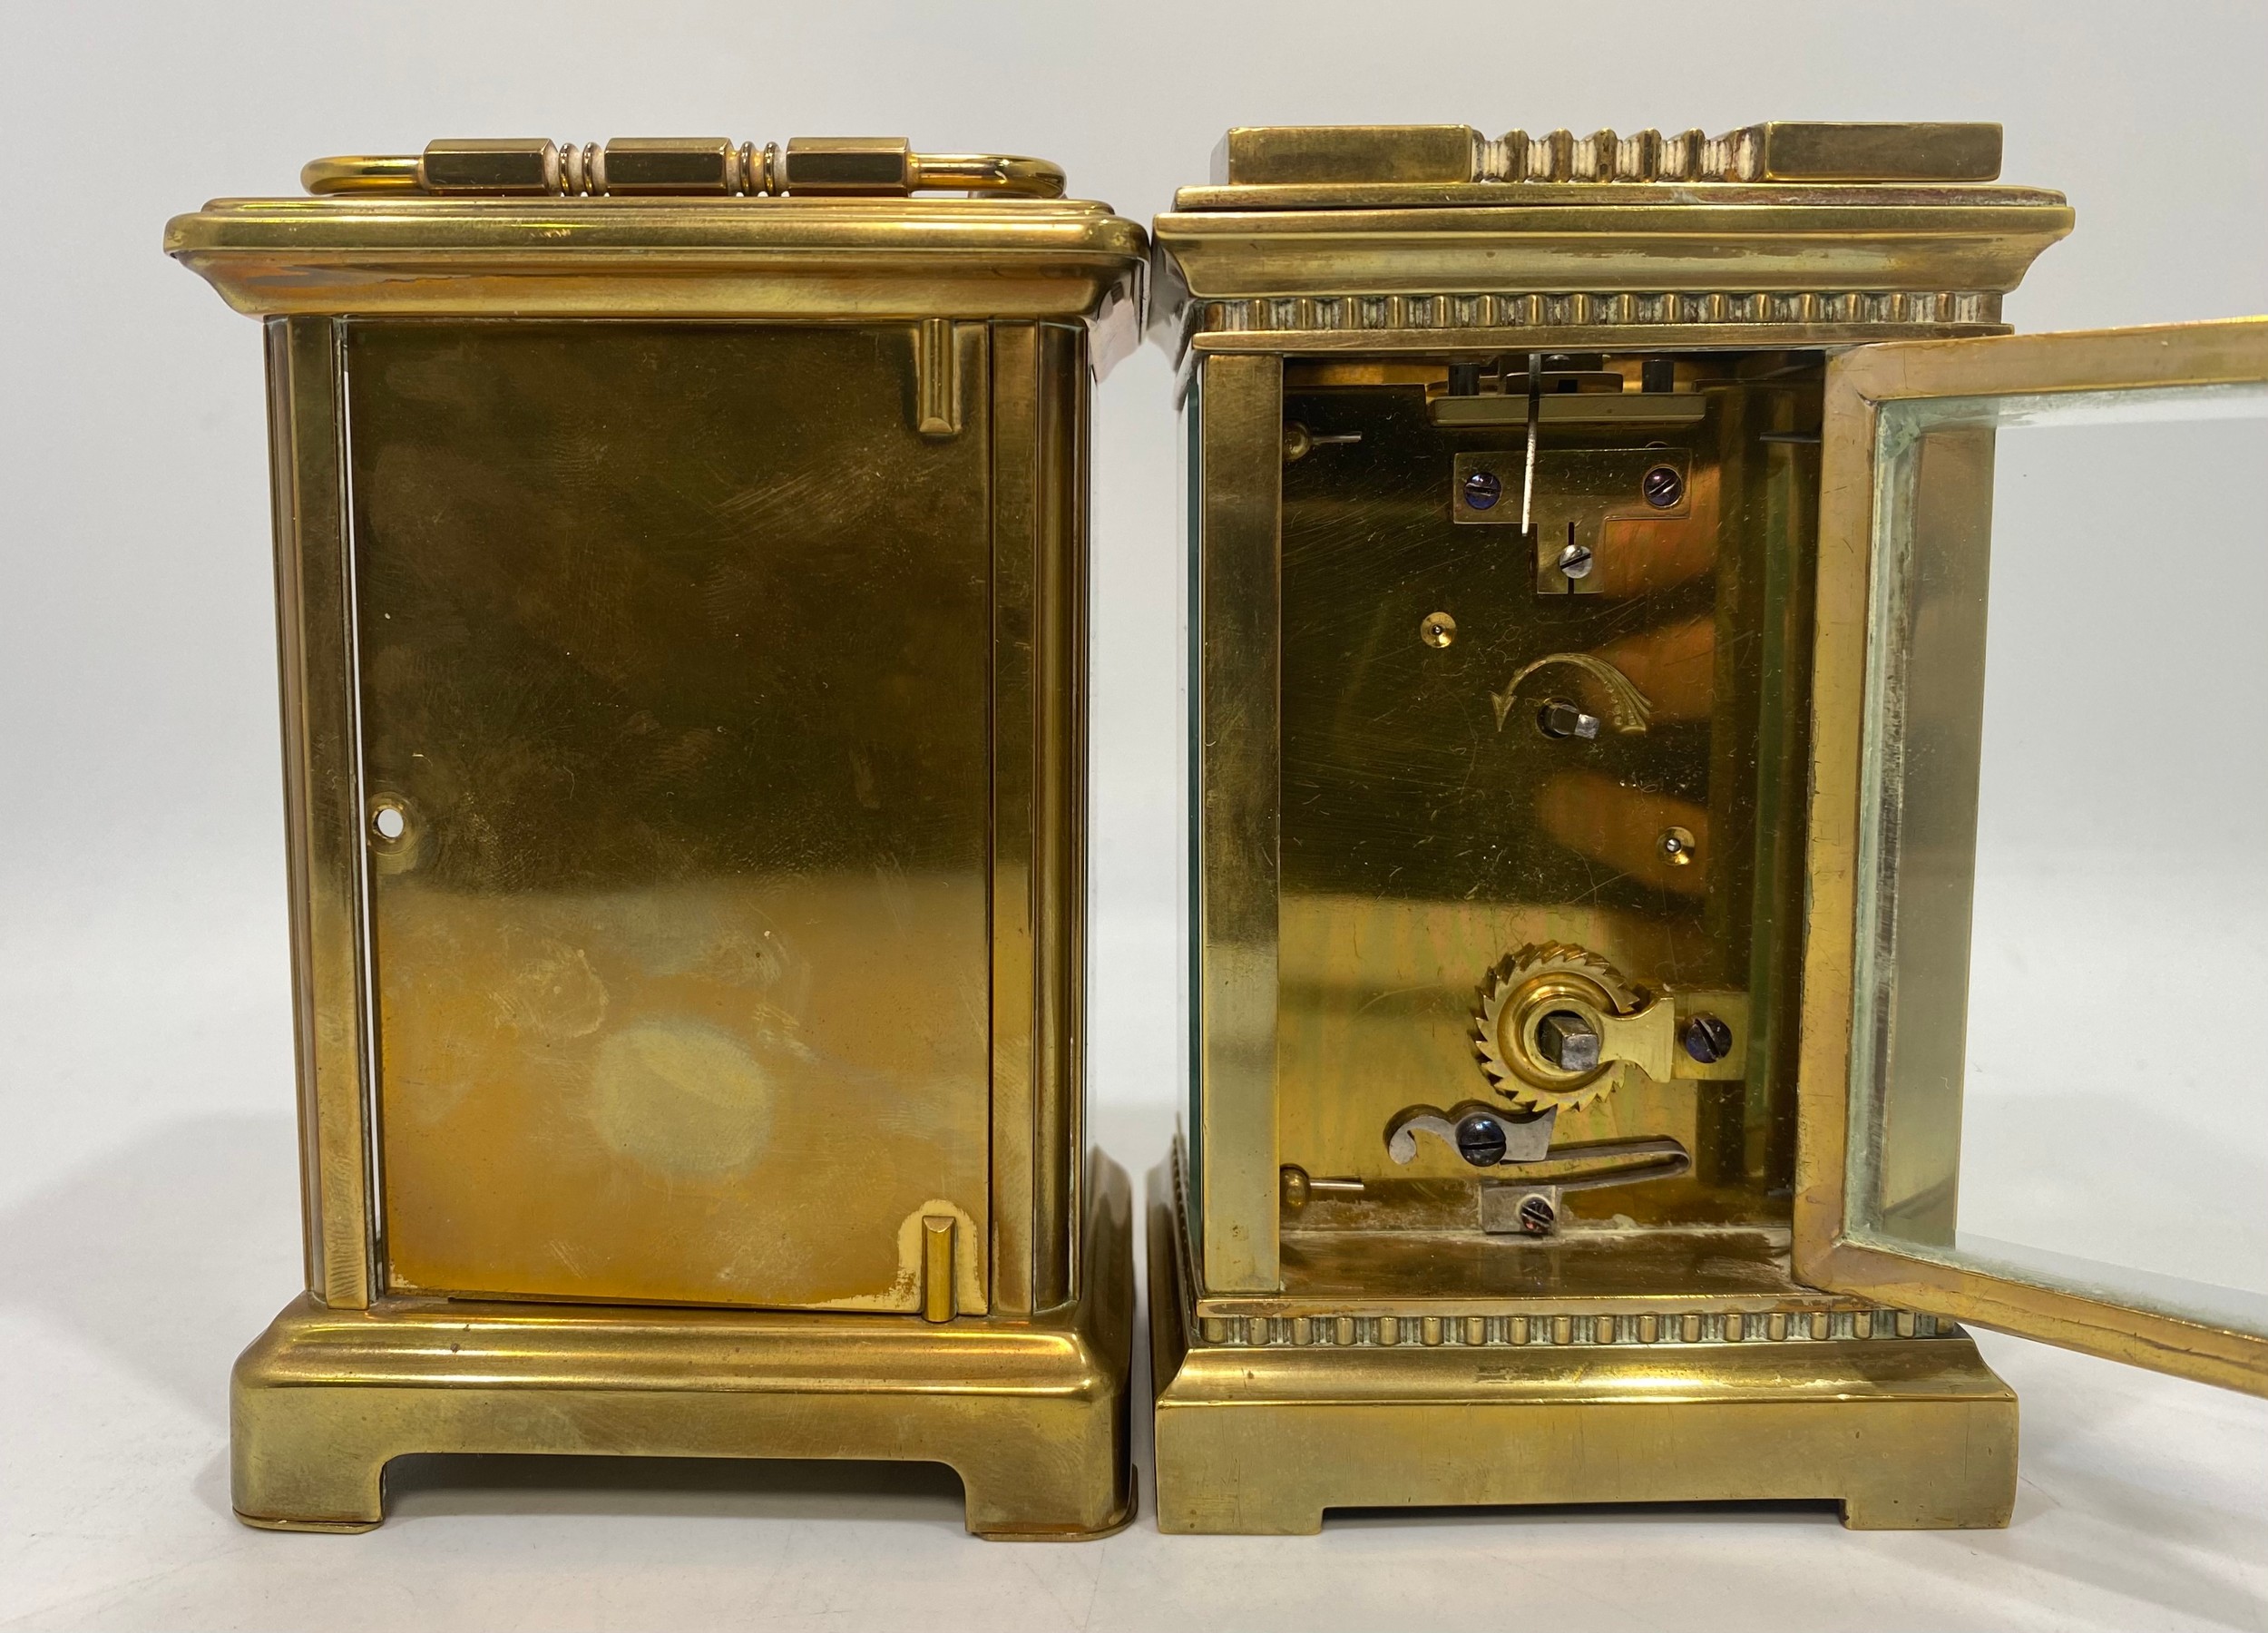 Two various brass cased carriage clocks, one a French example by Bayard, with 8-day movement - Image 3 of 4